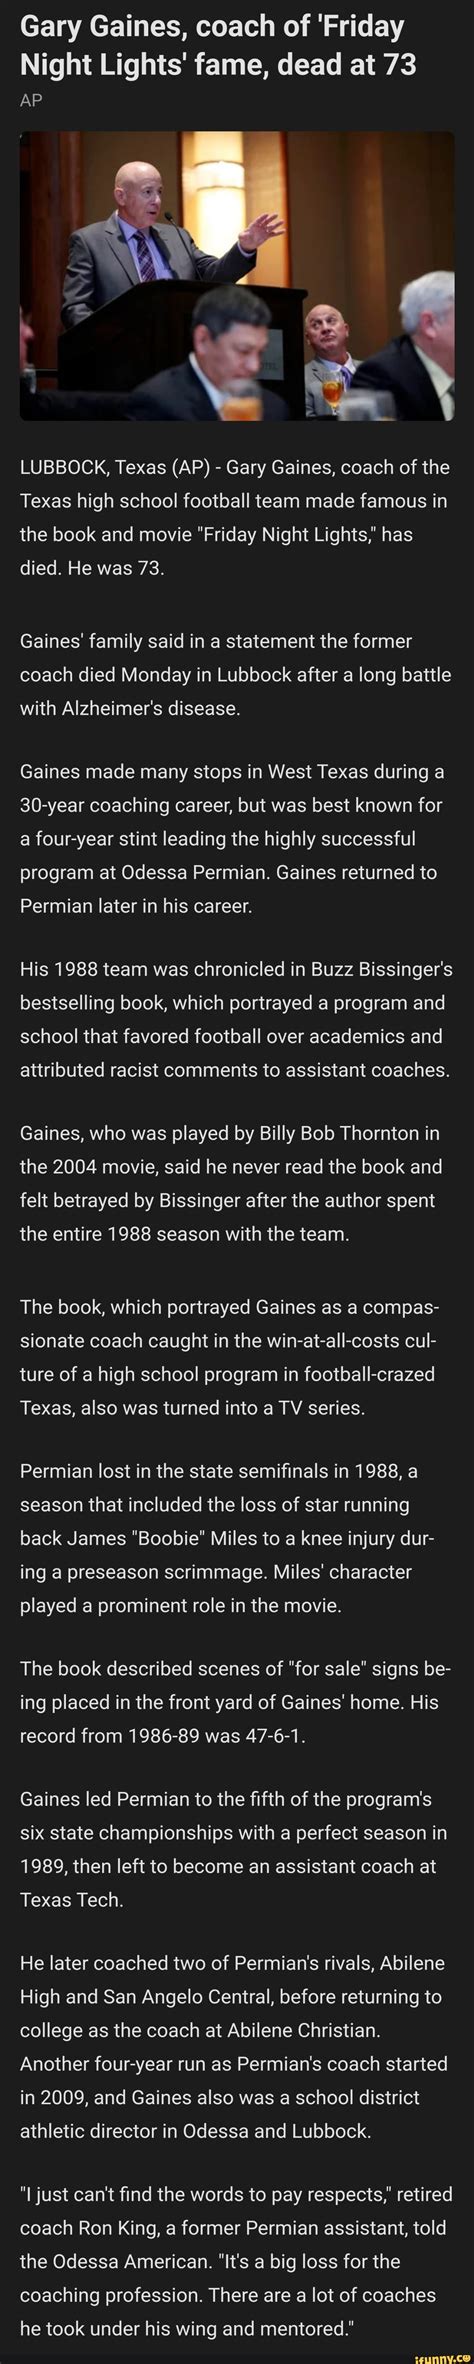 Gary Gaines Coach Of Friday Night Lights Fame Dead At 73 Ap Lubbock